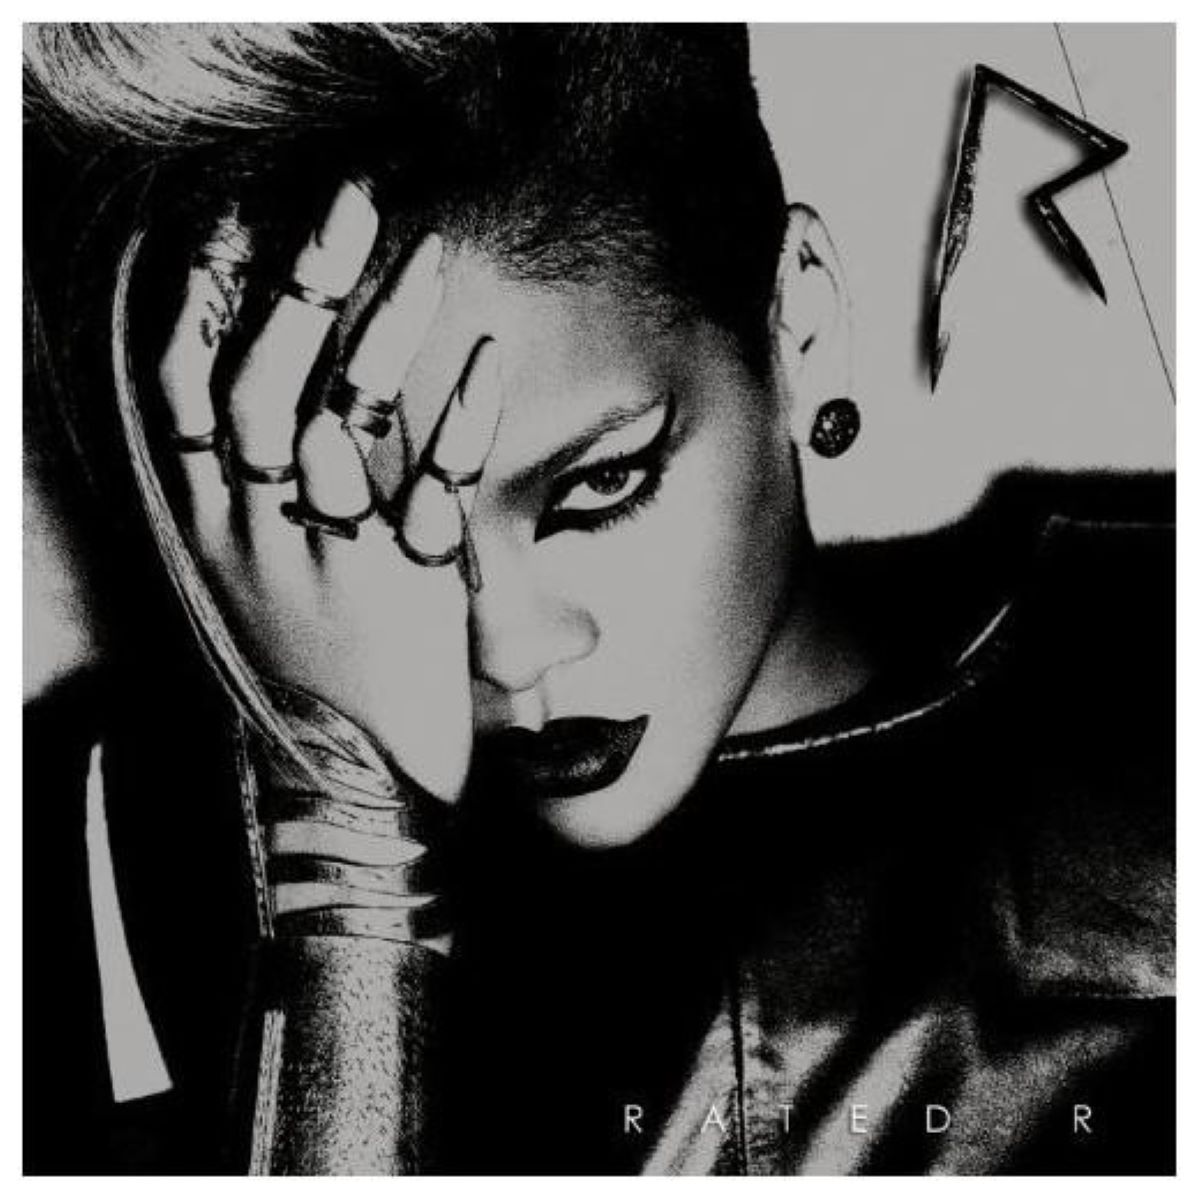 04. Rated R (2009)